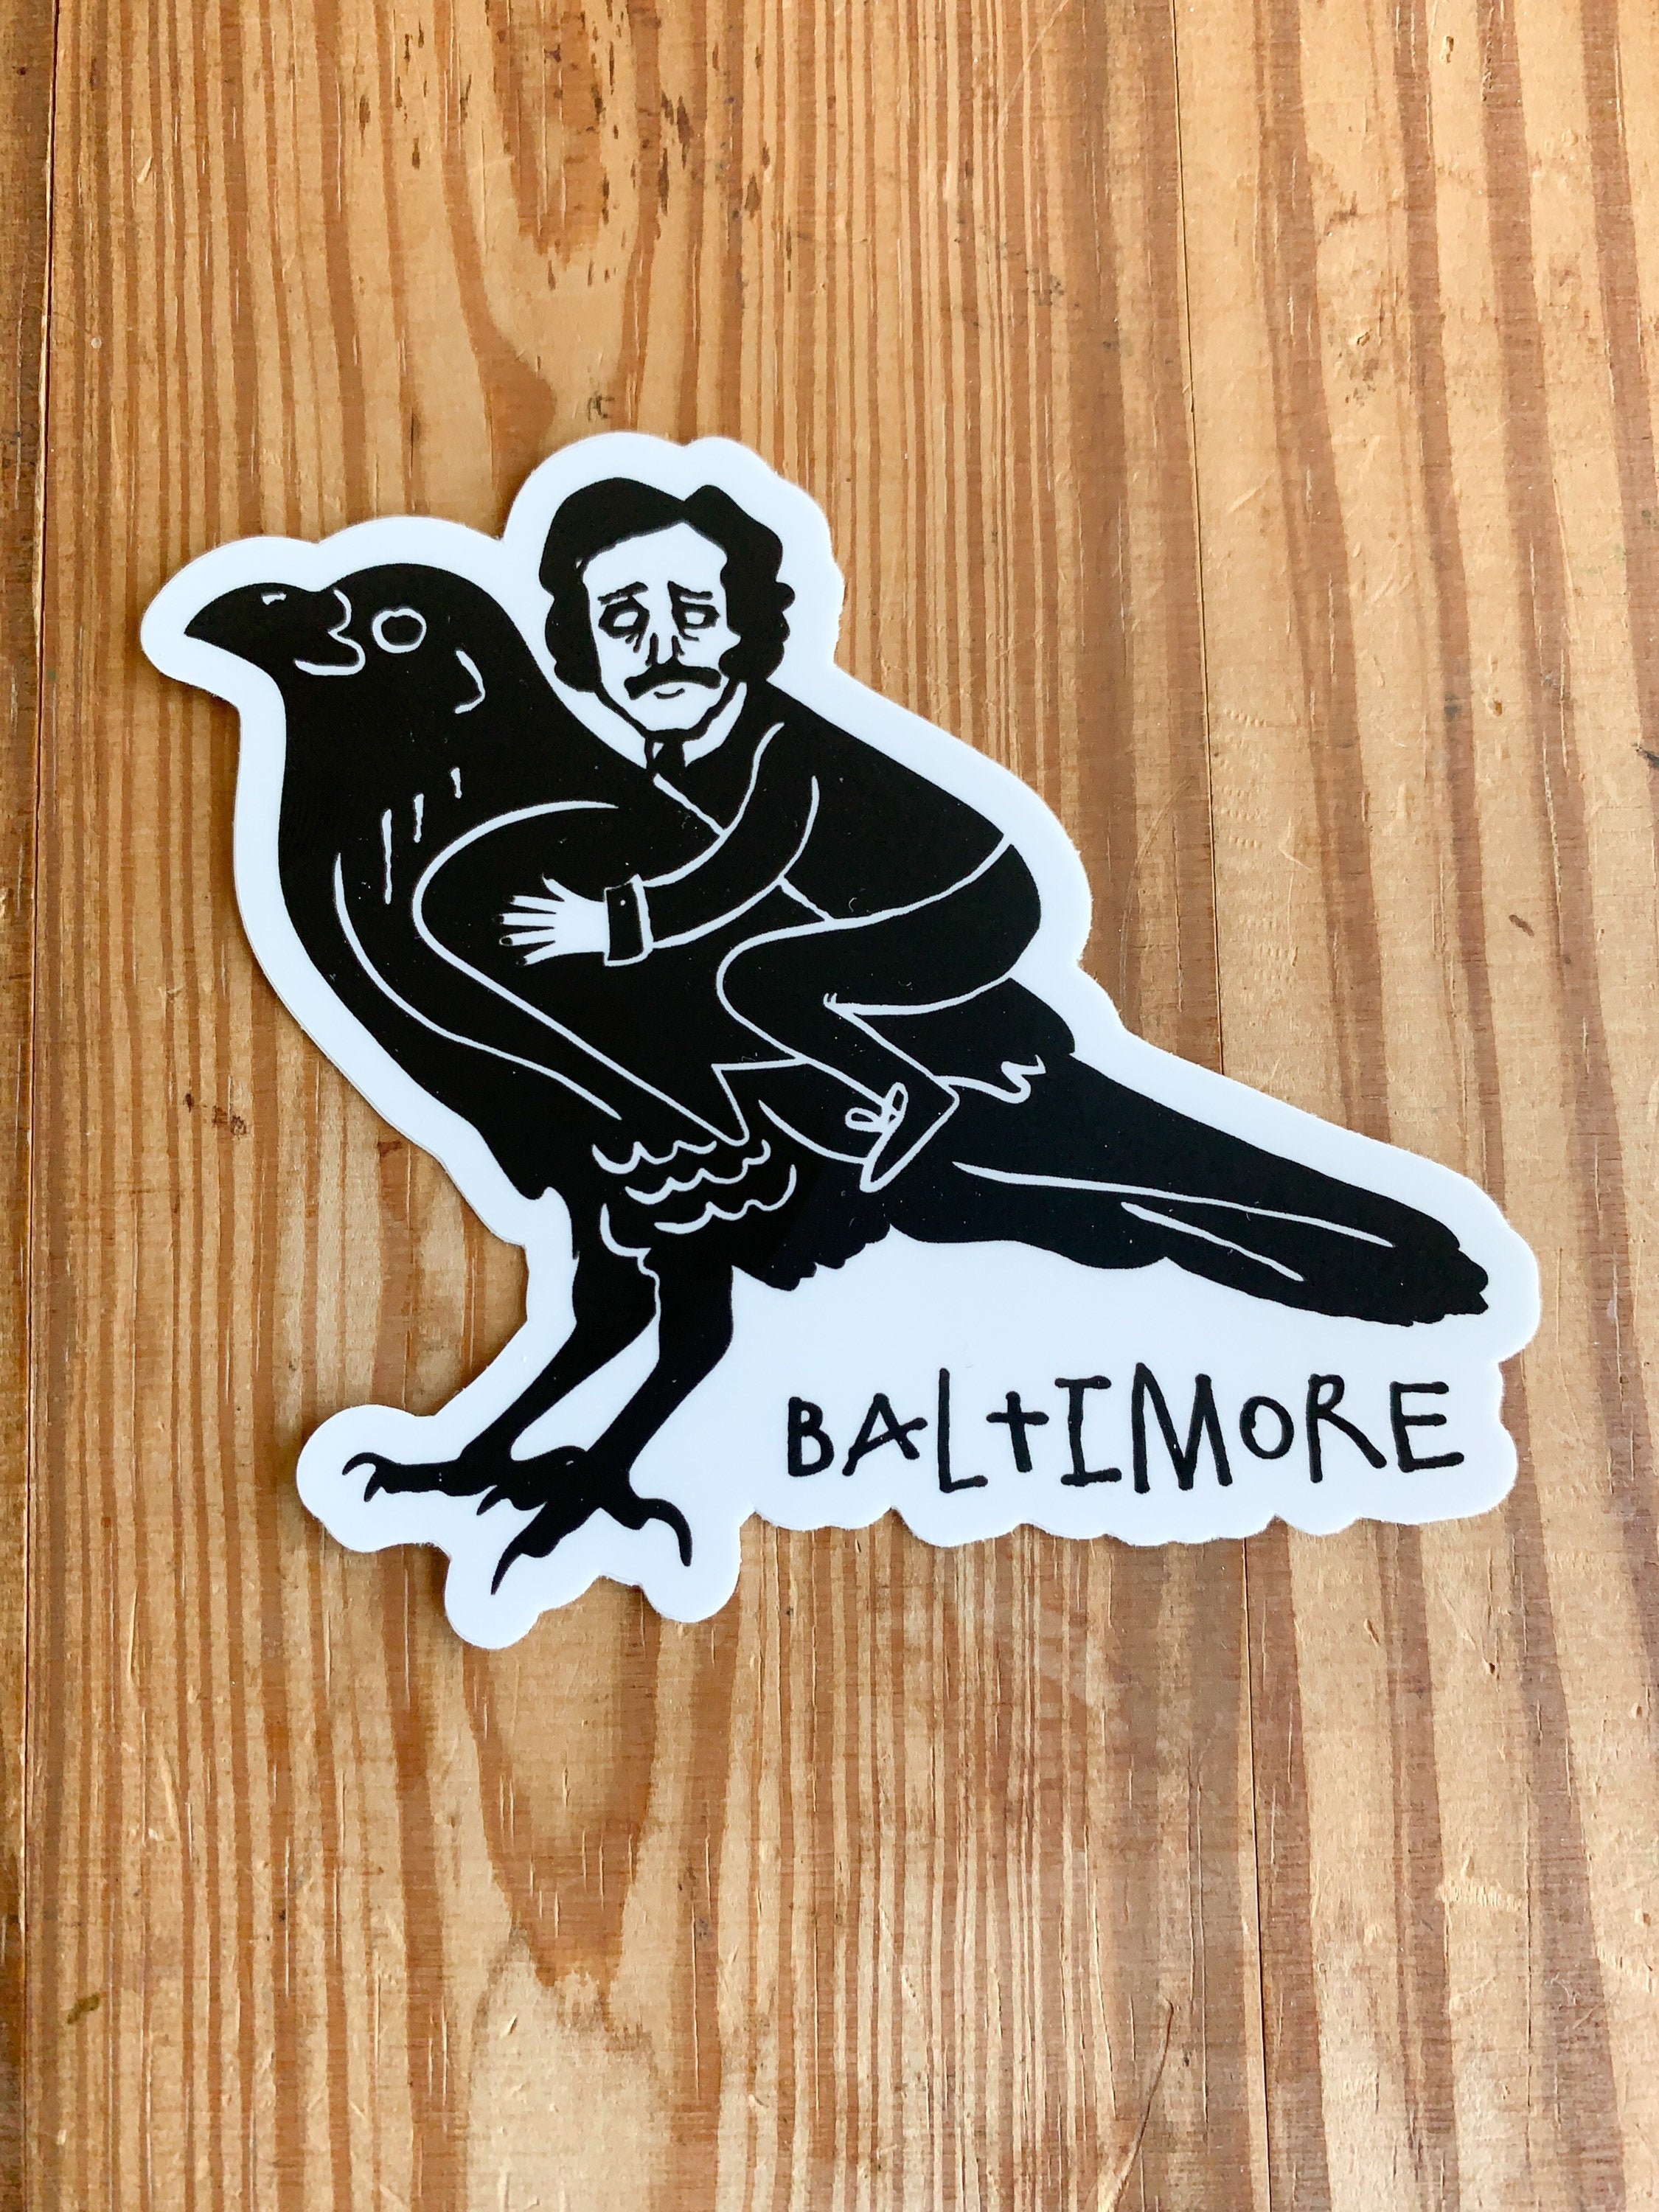  Cool Edgar Allan Poe Poetry Fridge Magnets Literary Macabre  Refrigerator or Locker Magnets Gift Set Emo Goth 5 Pack 1 Inch MP33-1 :  Handmade Products